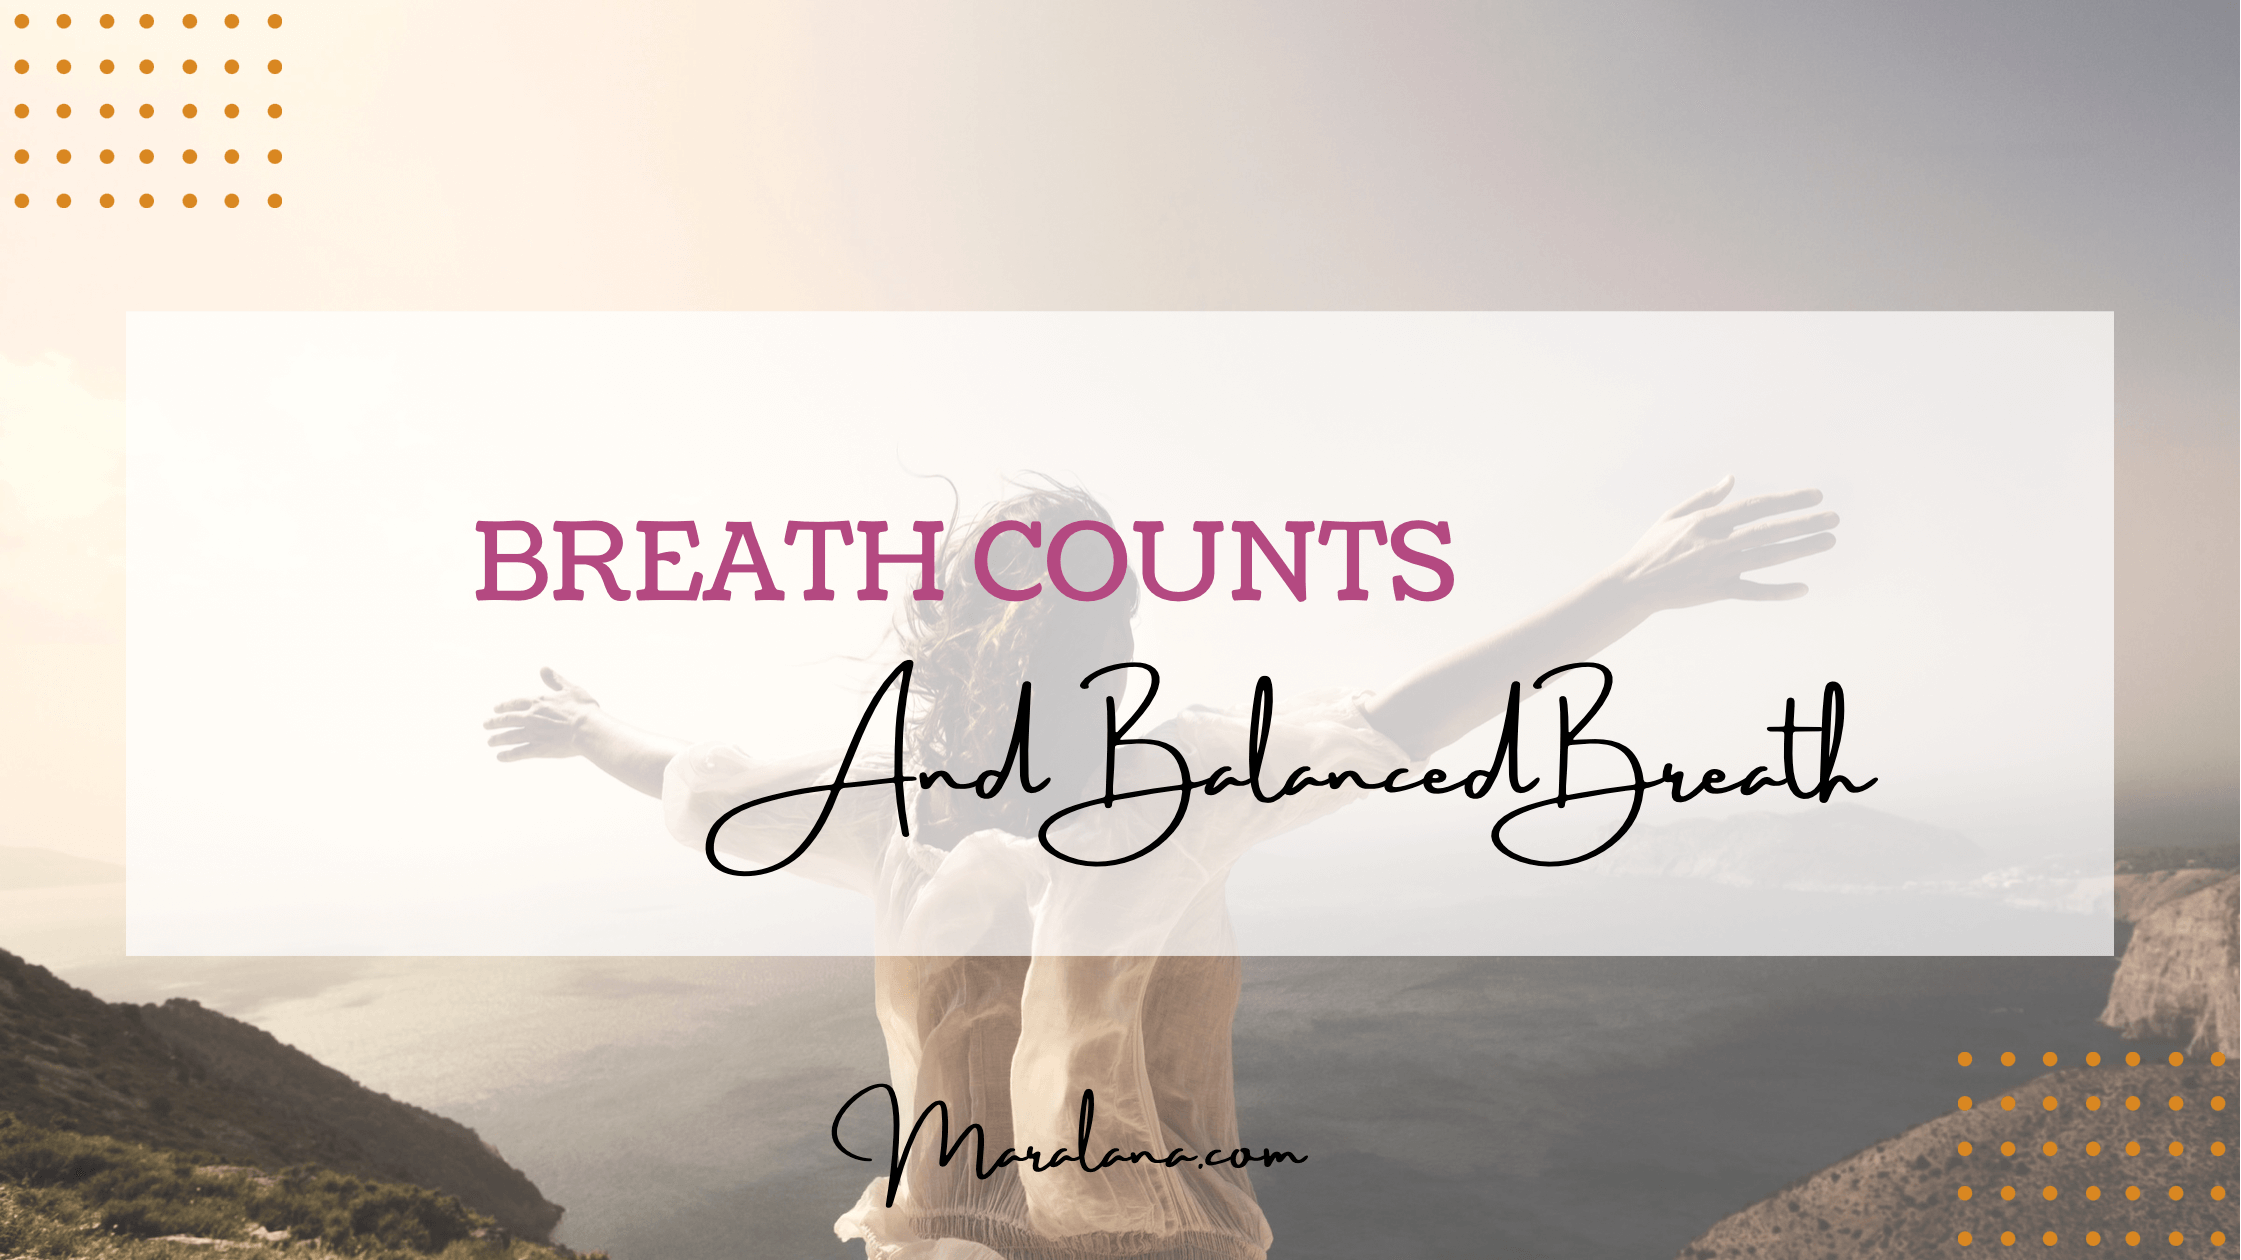 Breath Counts and Breathing in Balanced Breath